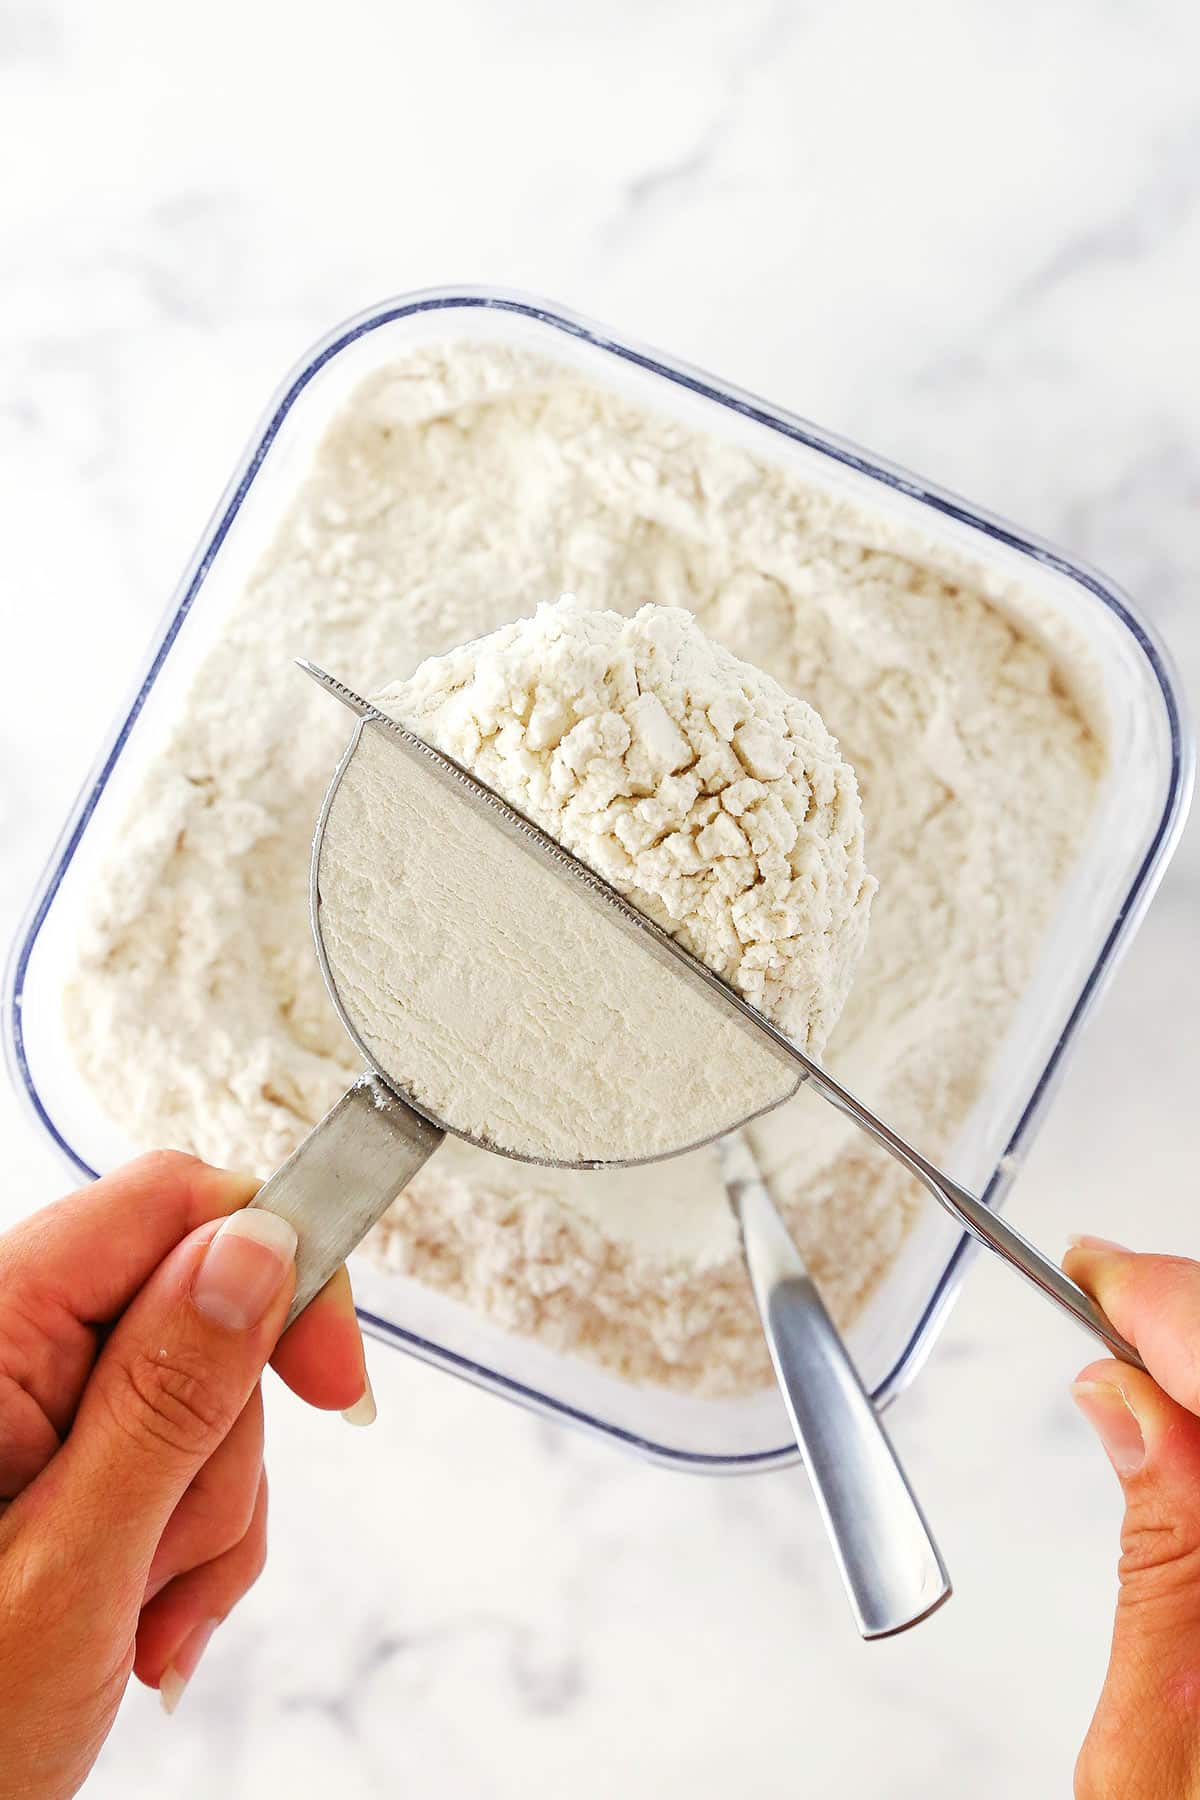 How To Measure Flour Correctly (Scoop & Level Method) - Sweets & Thank You